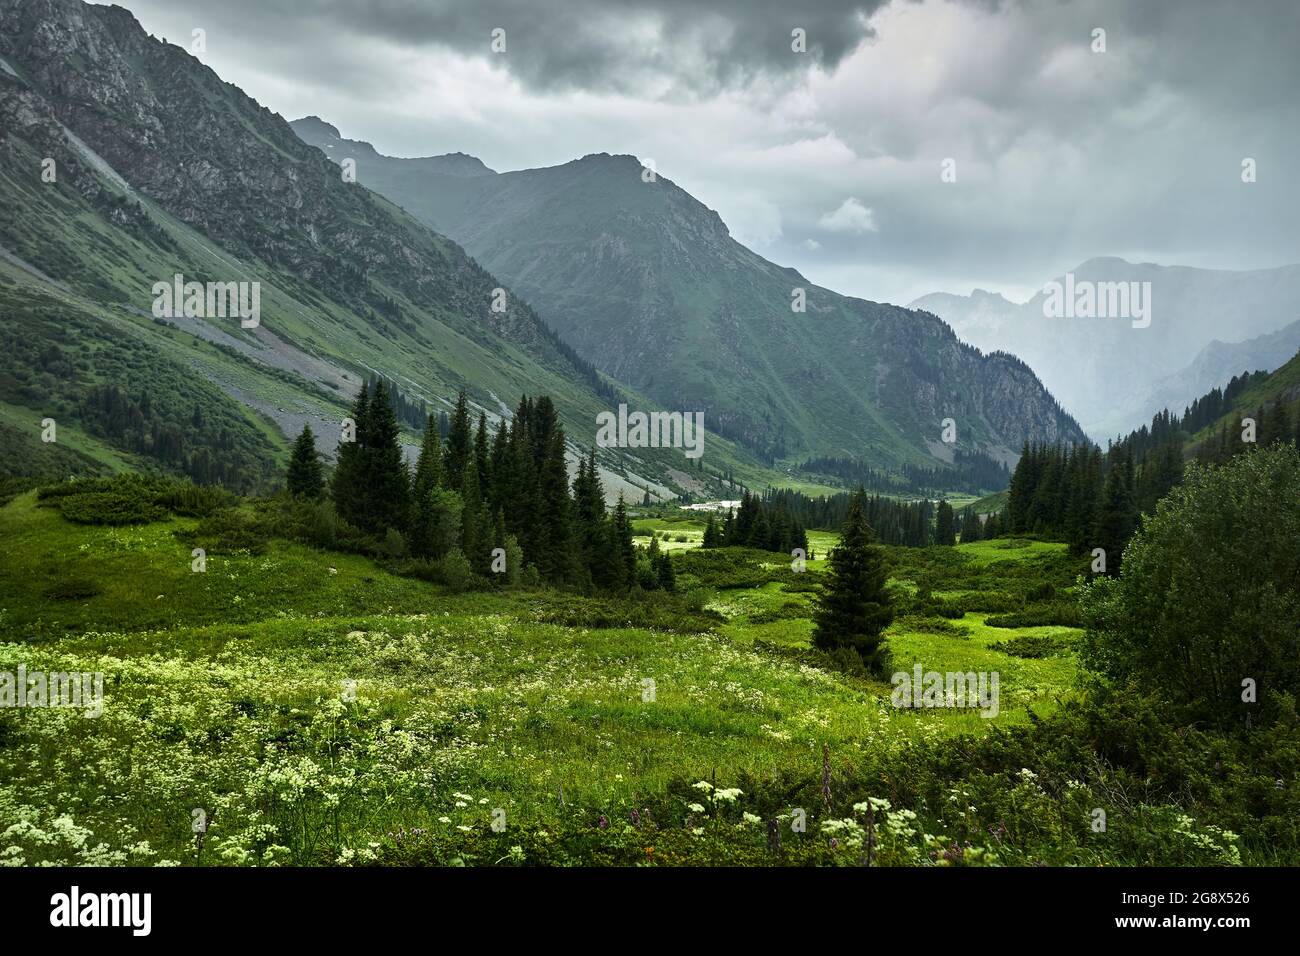 Beautiful scenery of river in the mountain valley and green lush forest on Almaty, Kazakhstan Stock Photo